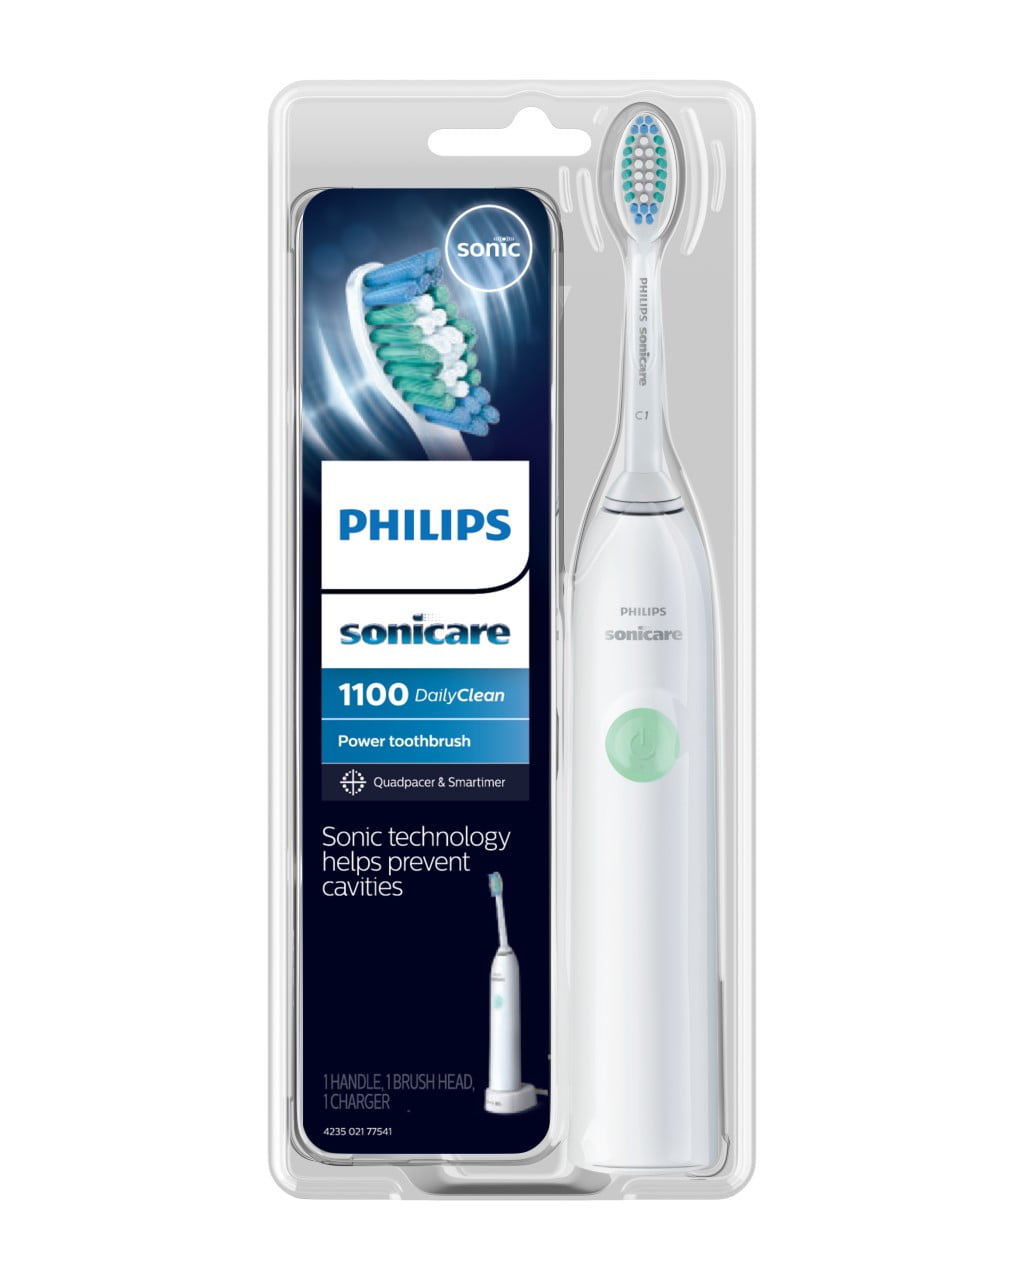 Philips sonicare dailyclean 1100 electric toothbrush